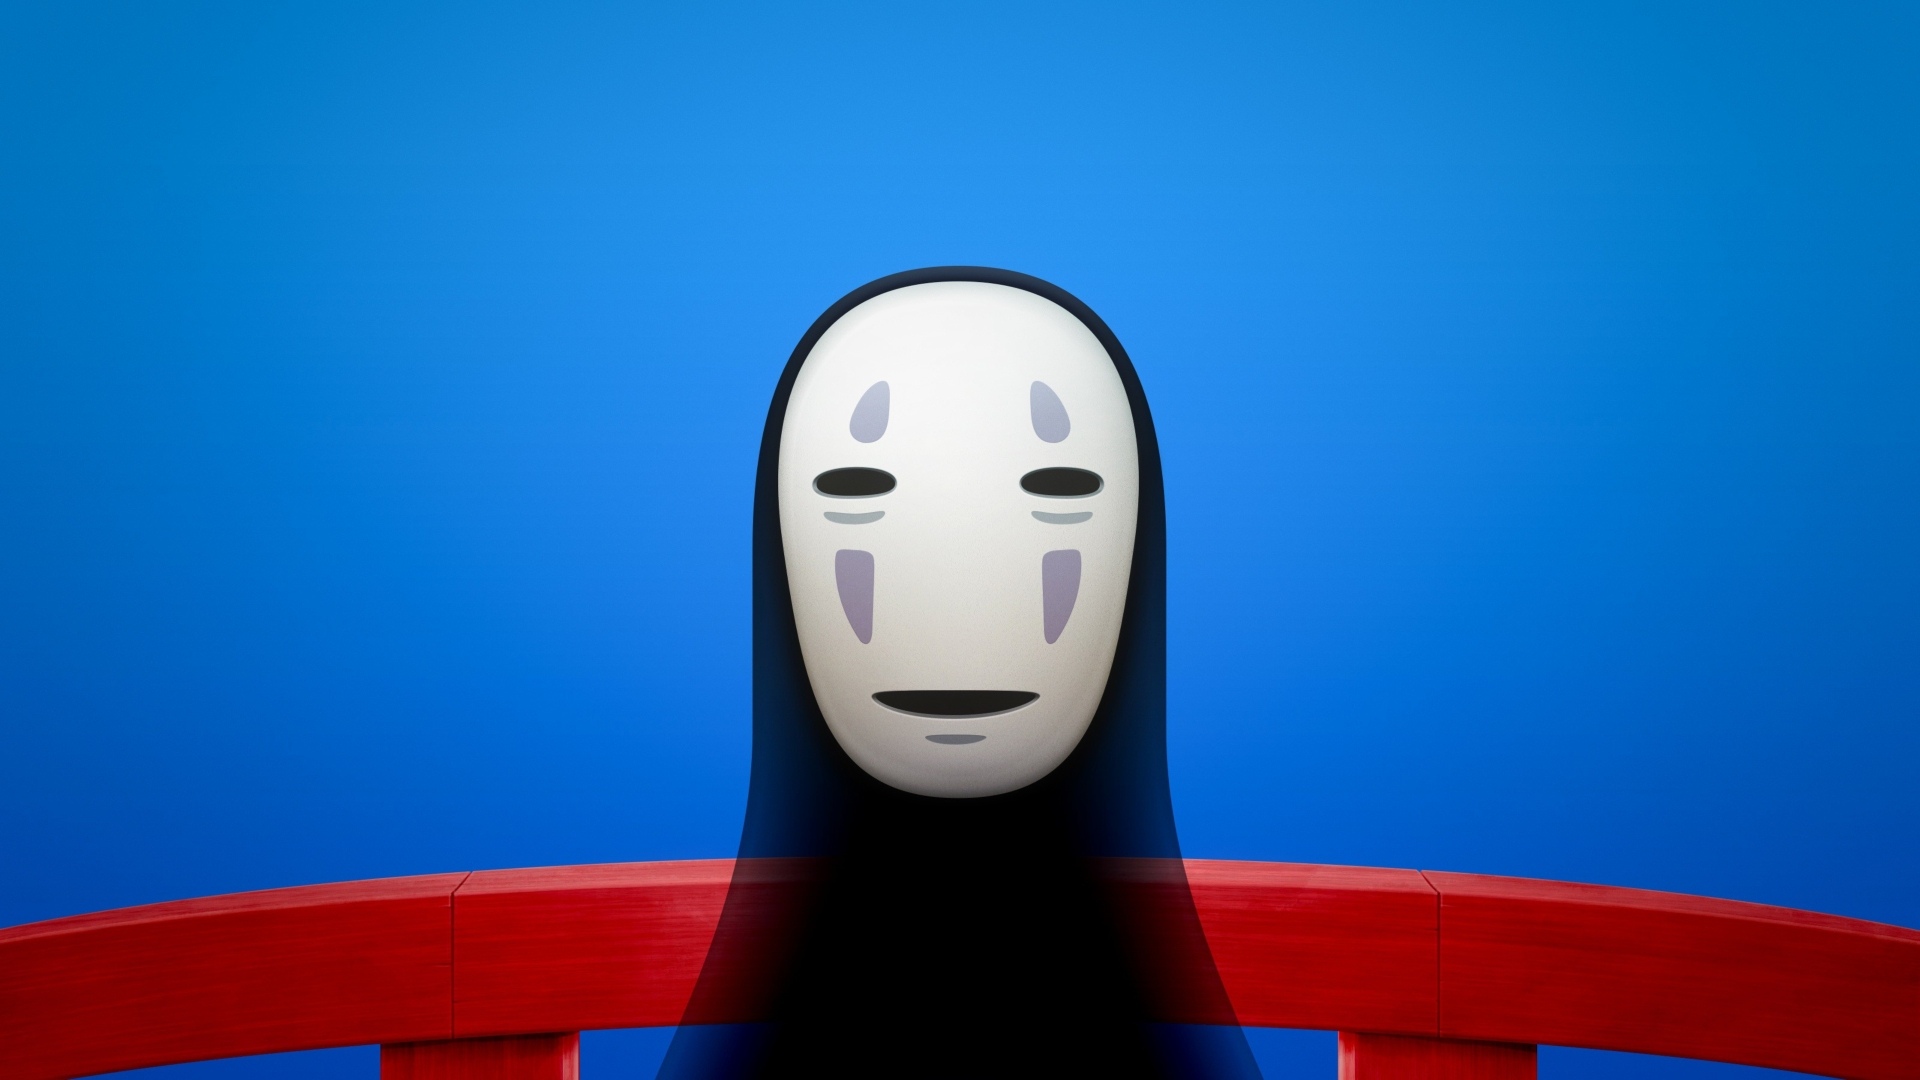 No Face Background